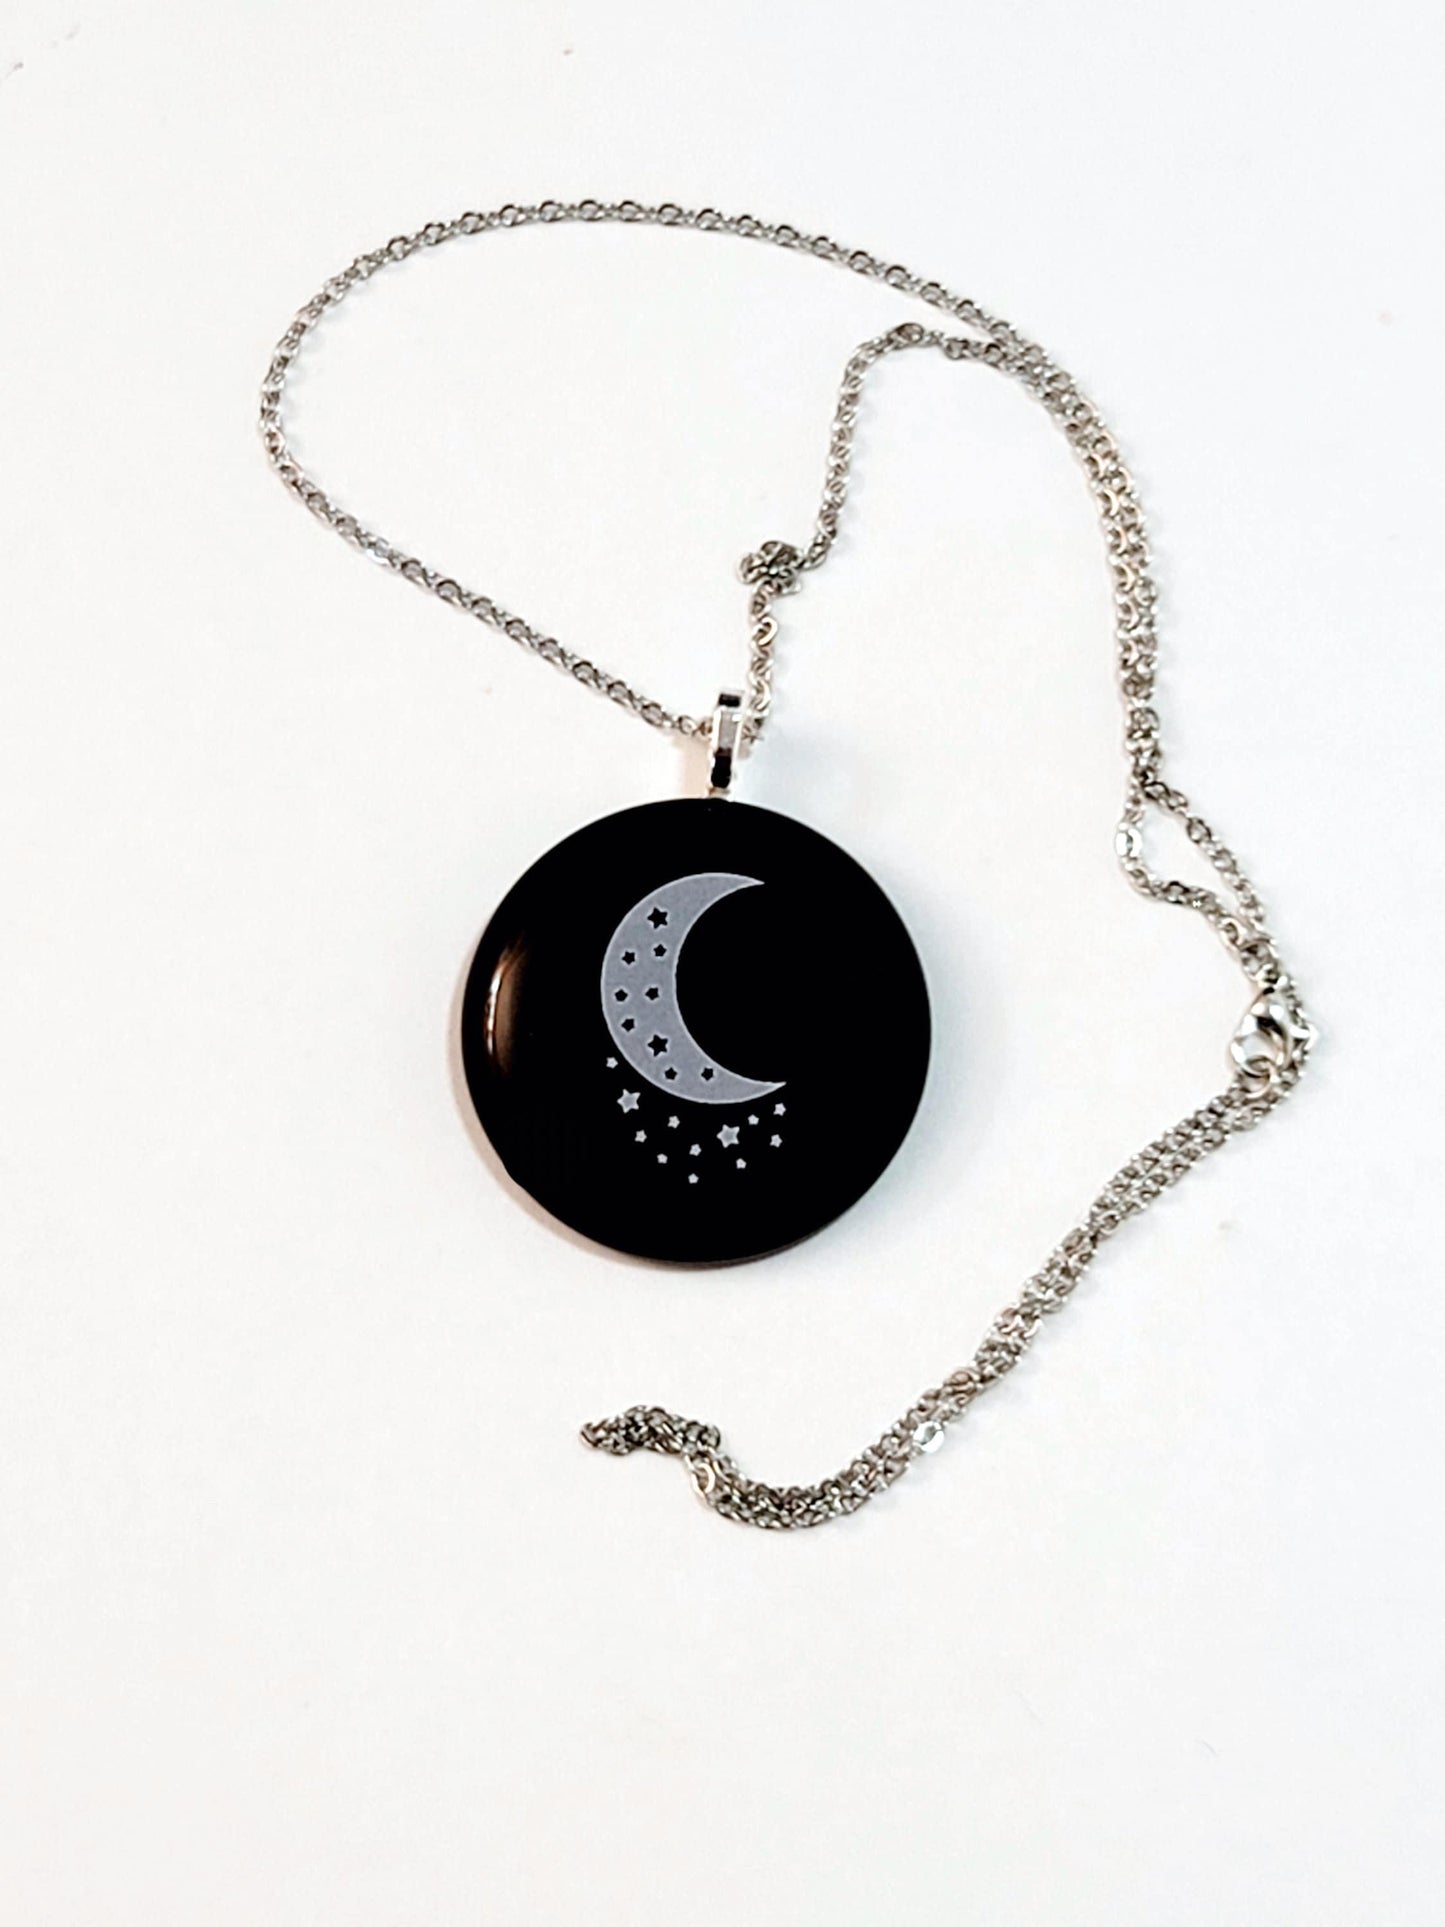 White Stars & Crescent Moon black fused glass circle pendant necklace with 20 inch steel chain seeds glassworks seedsglassworks